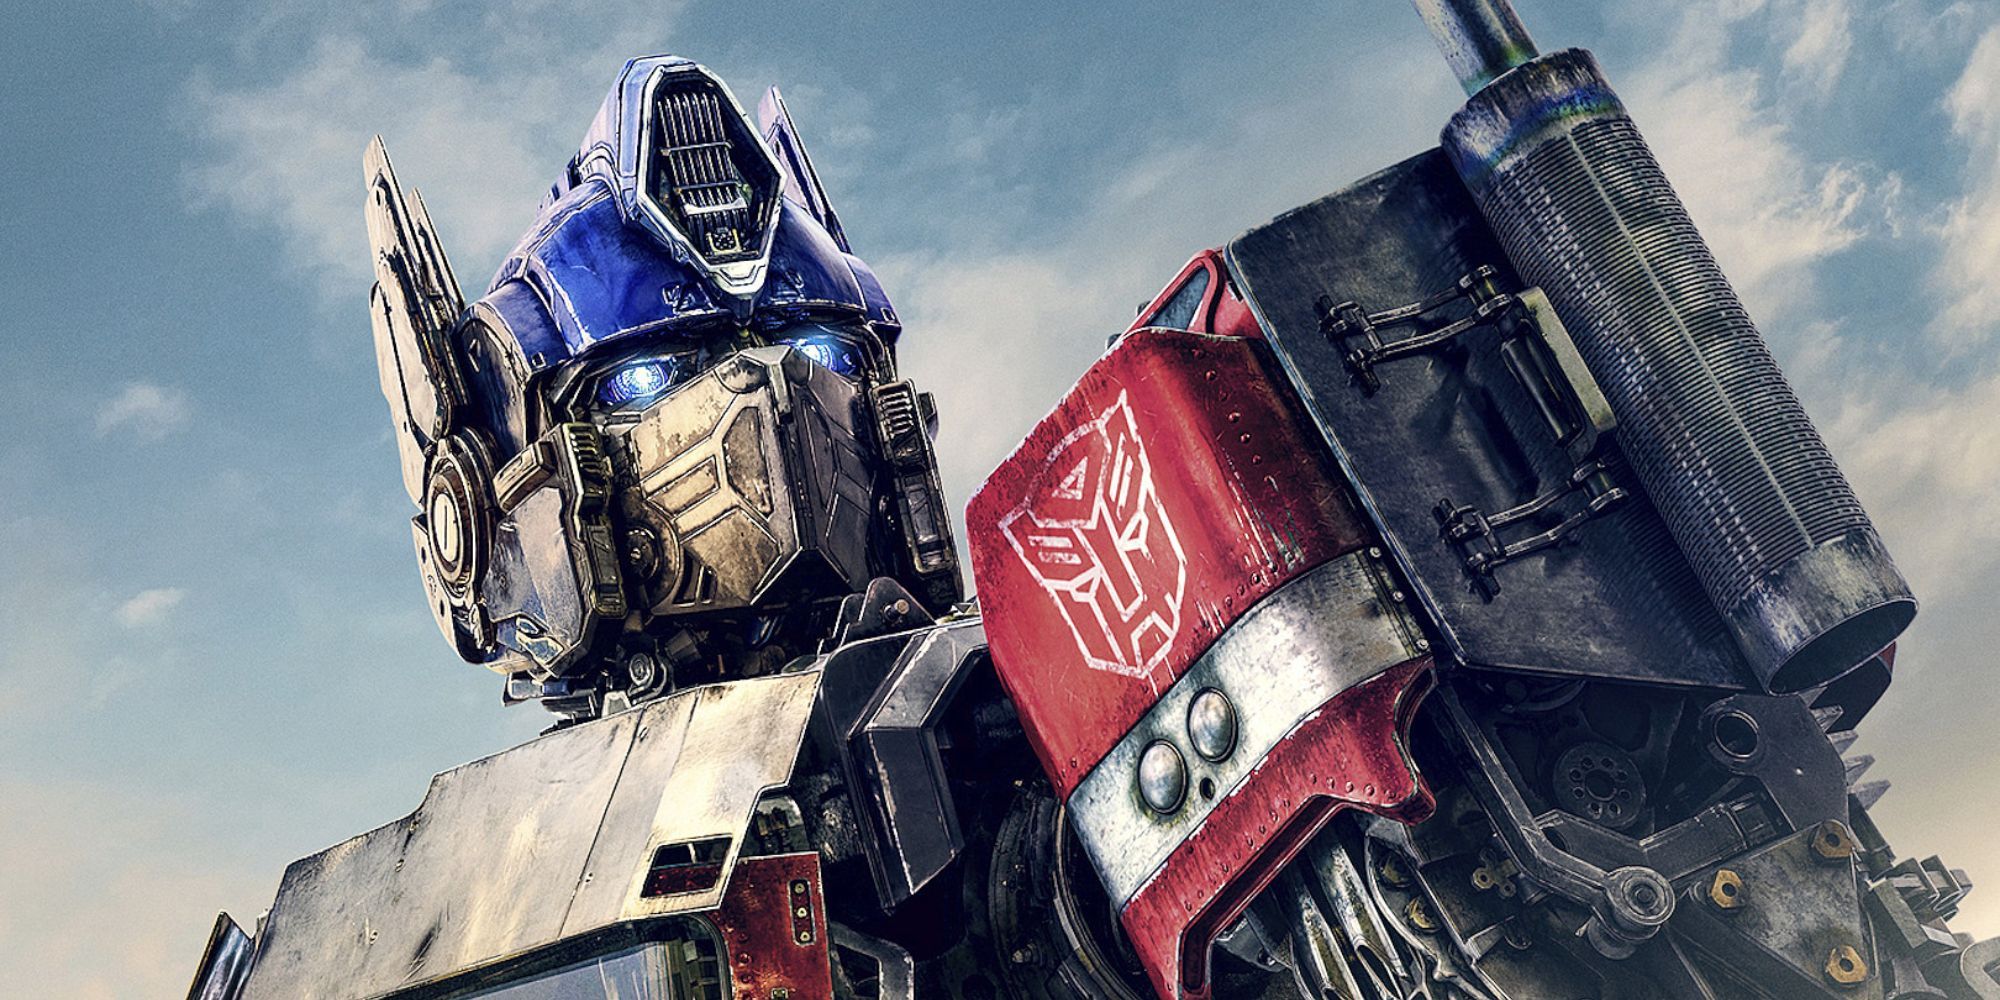 Optimus Prime in the live-action Transformers movies.